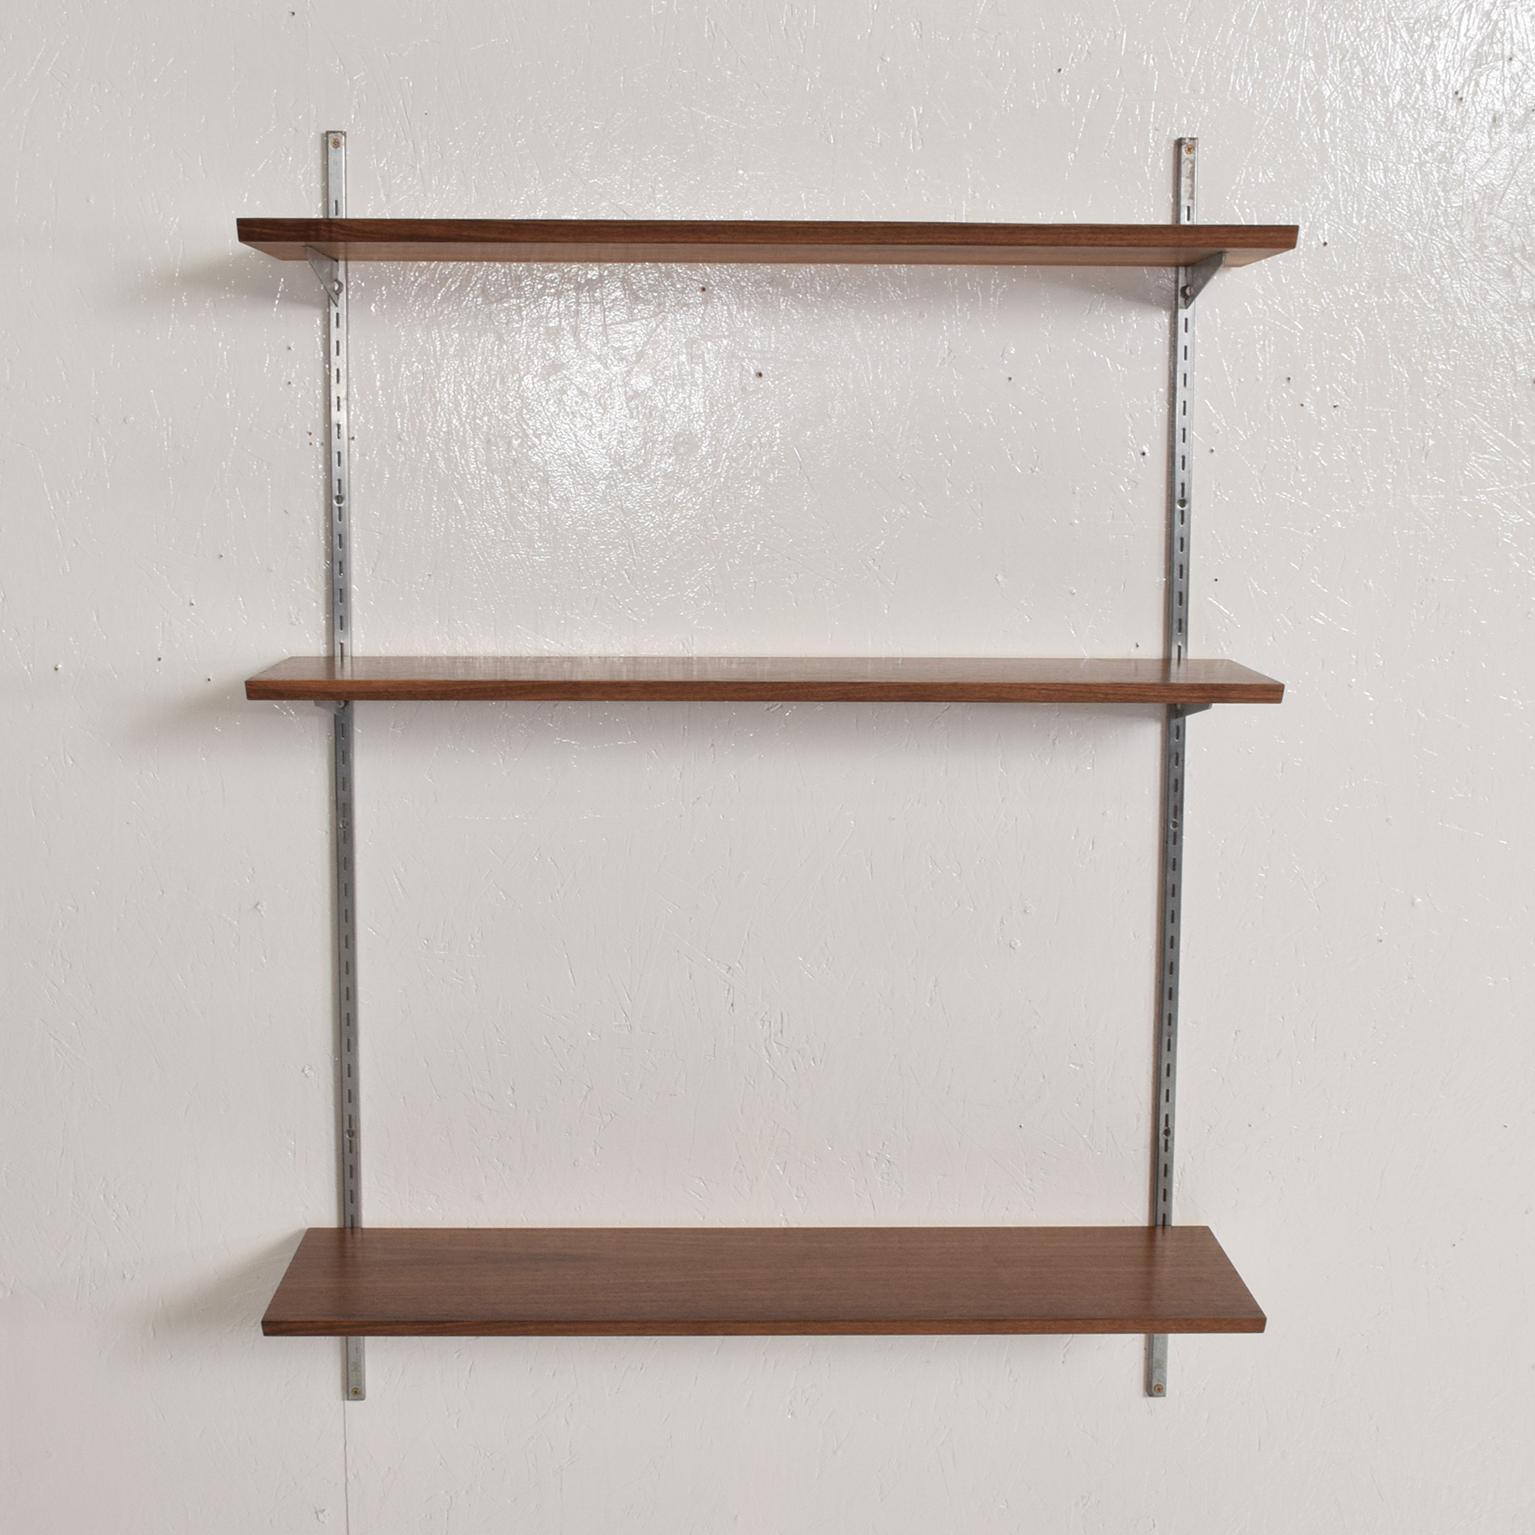 For your consideration, a vintage bookcase shelving wall unit, one bay. Constructed with walnut shelves and aluminum brackets, metal uprights. The USA, circa 1960s. 

Dimensions: 48 1/2